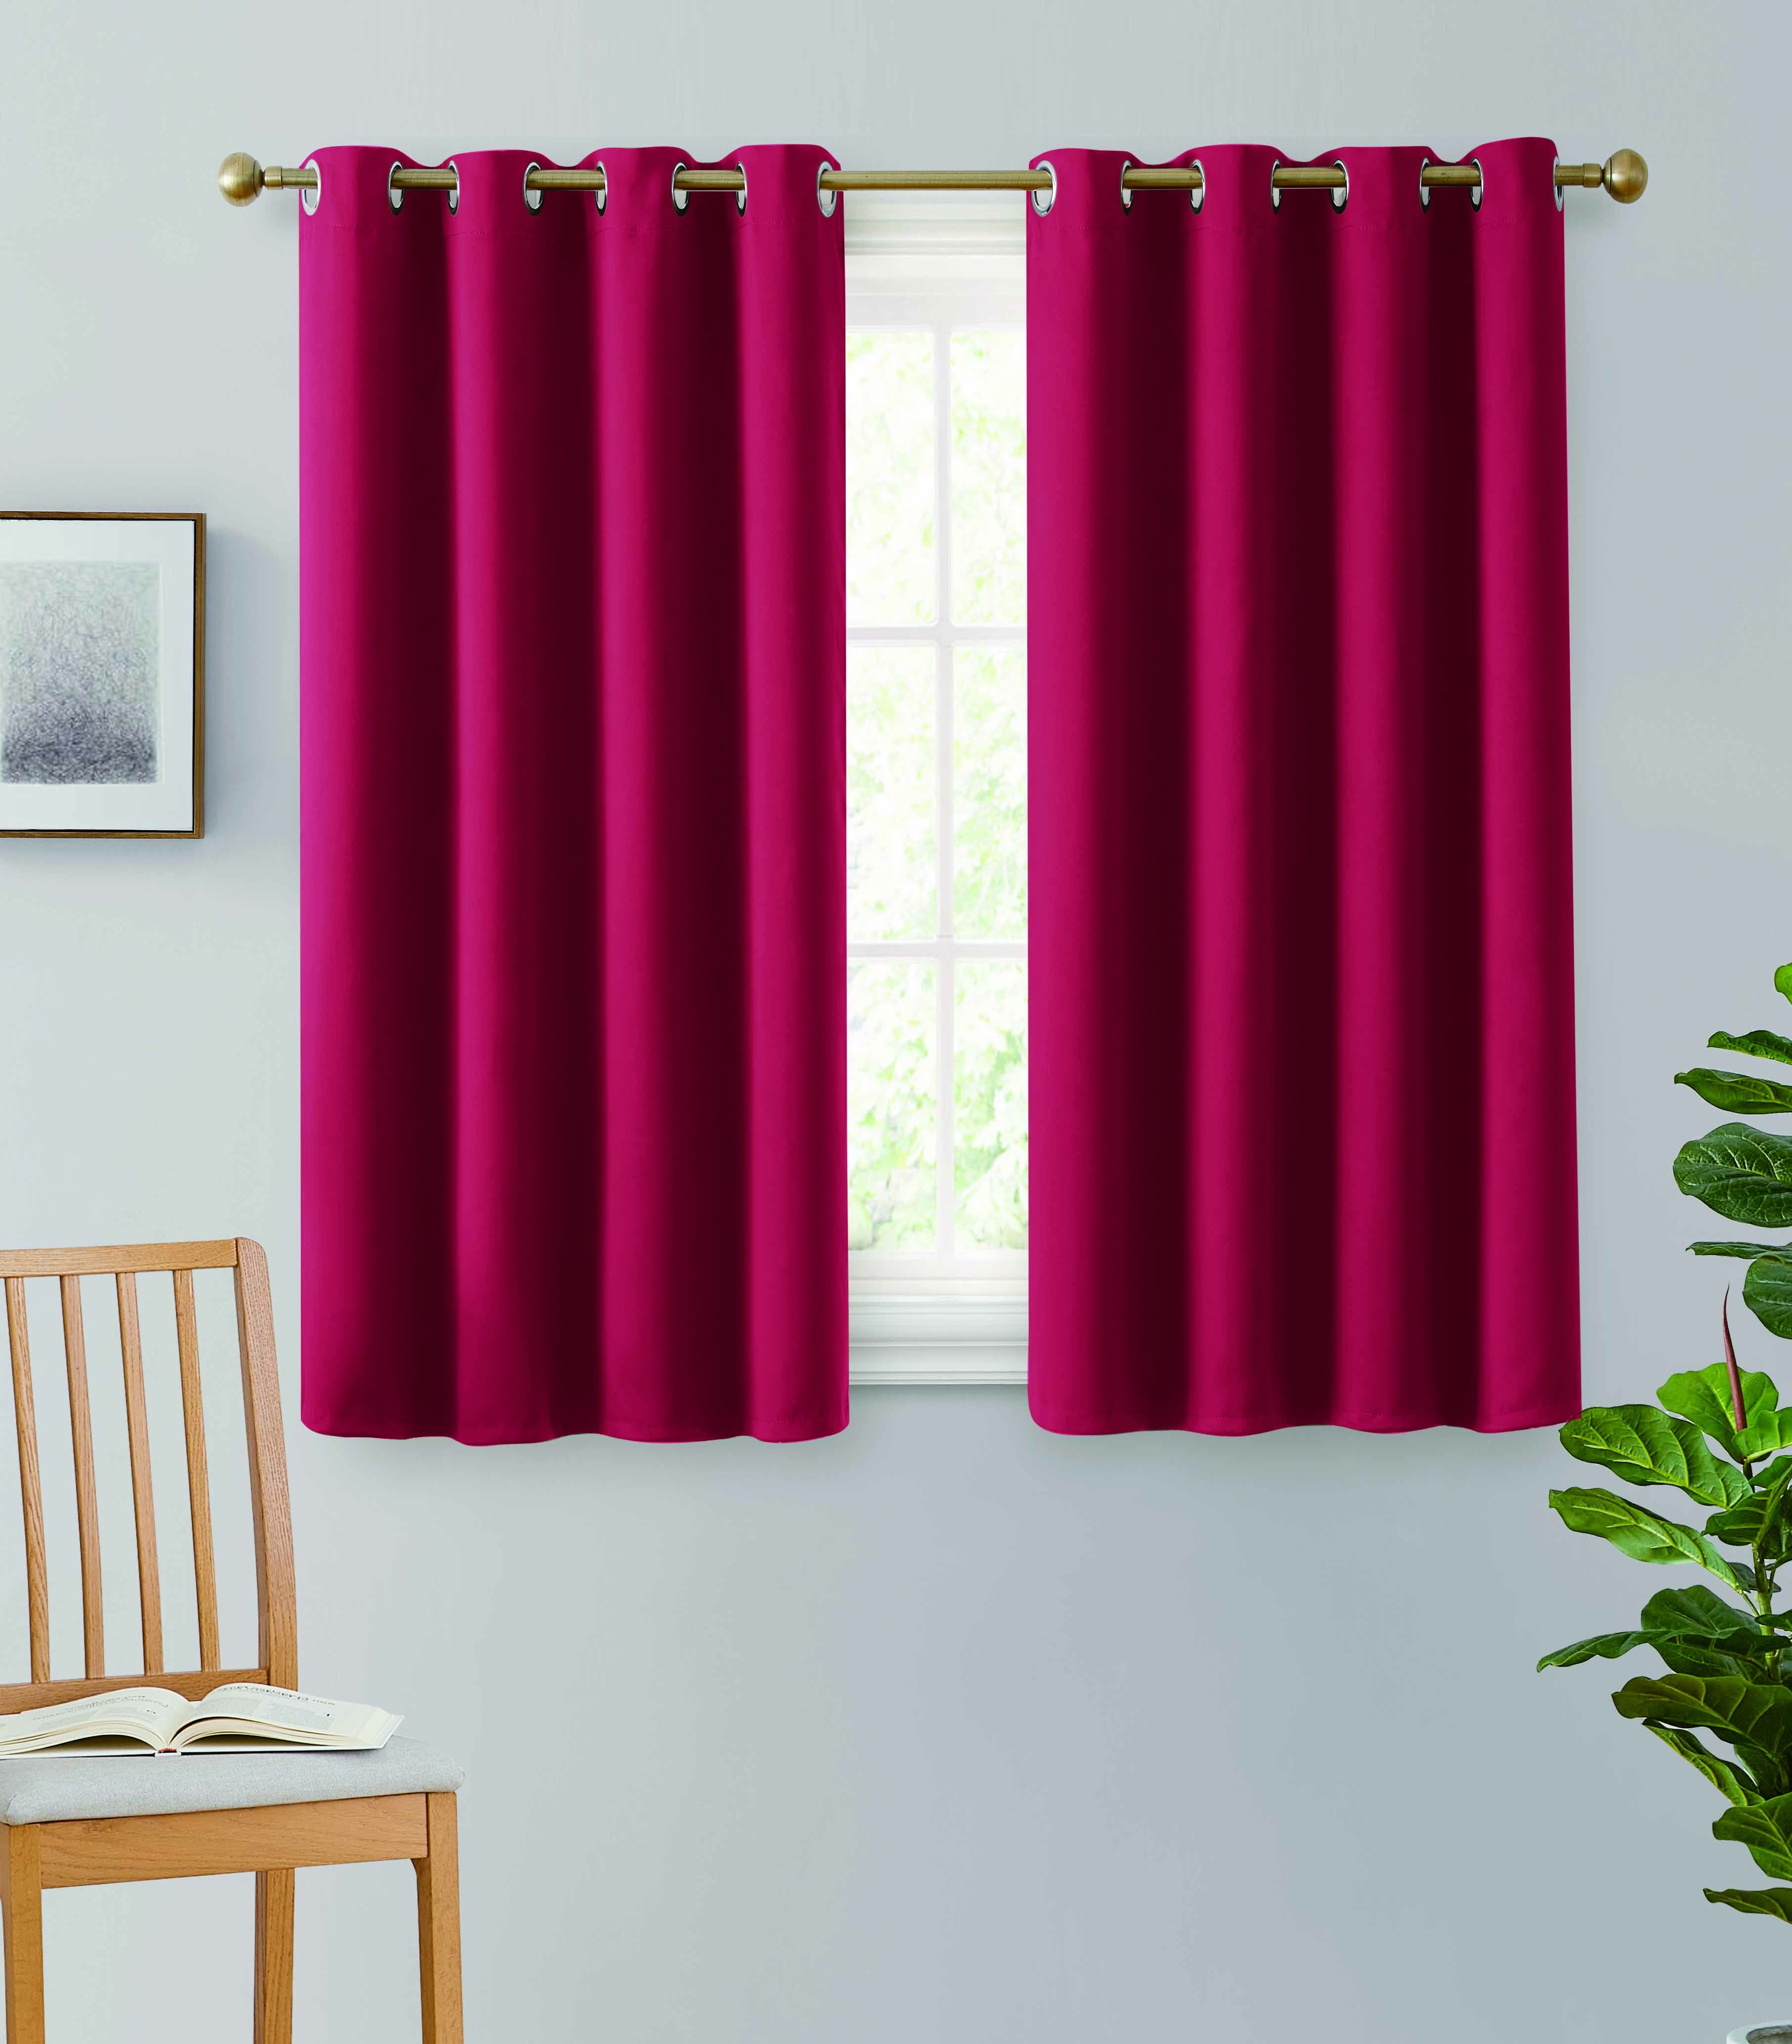 2PC Insulated Lined Heavy Thick Blackout Grommet Window Curtain Panels KK92 108" 